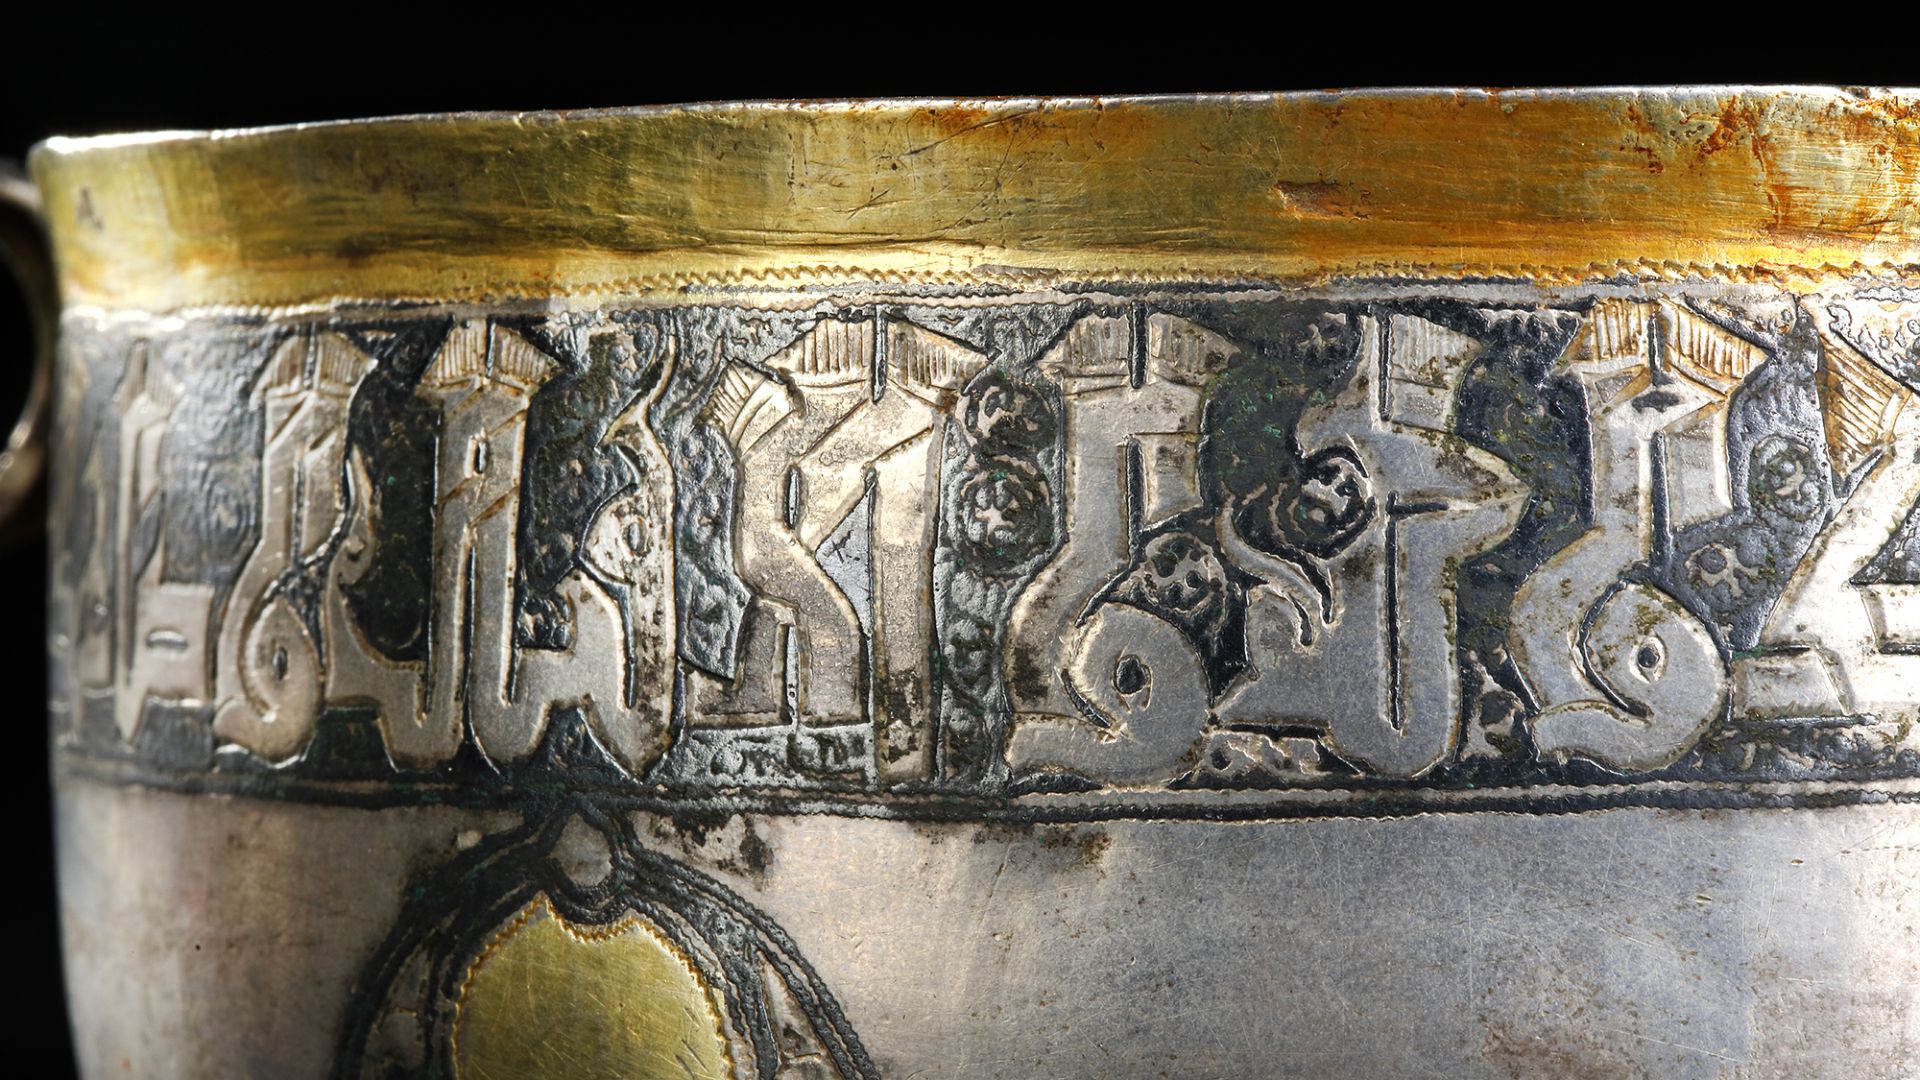 A RARE SILVER AND NIELLOED CUP WITH KUFIC INSCRIPTION, PERSIA OR CENTRAL ASIA, 11TH-12TH CENTURY - Image 32 of 34